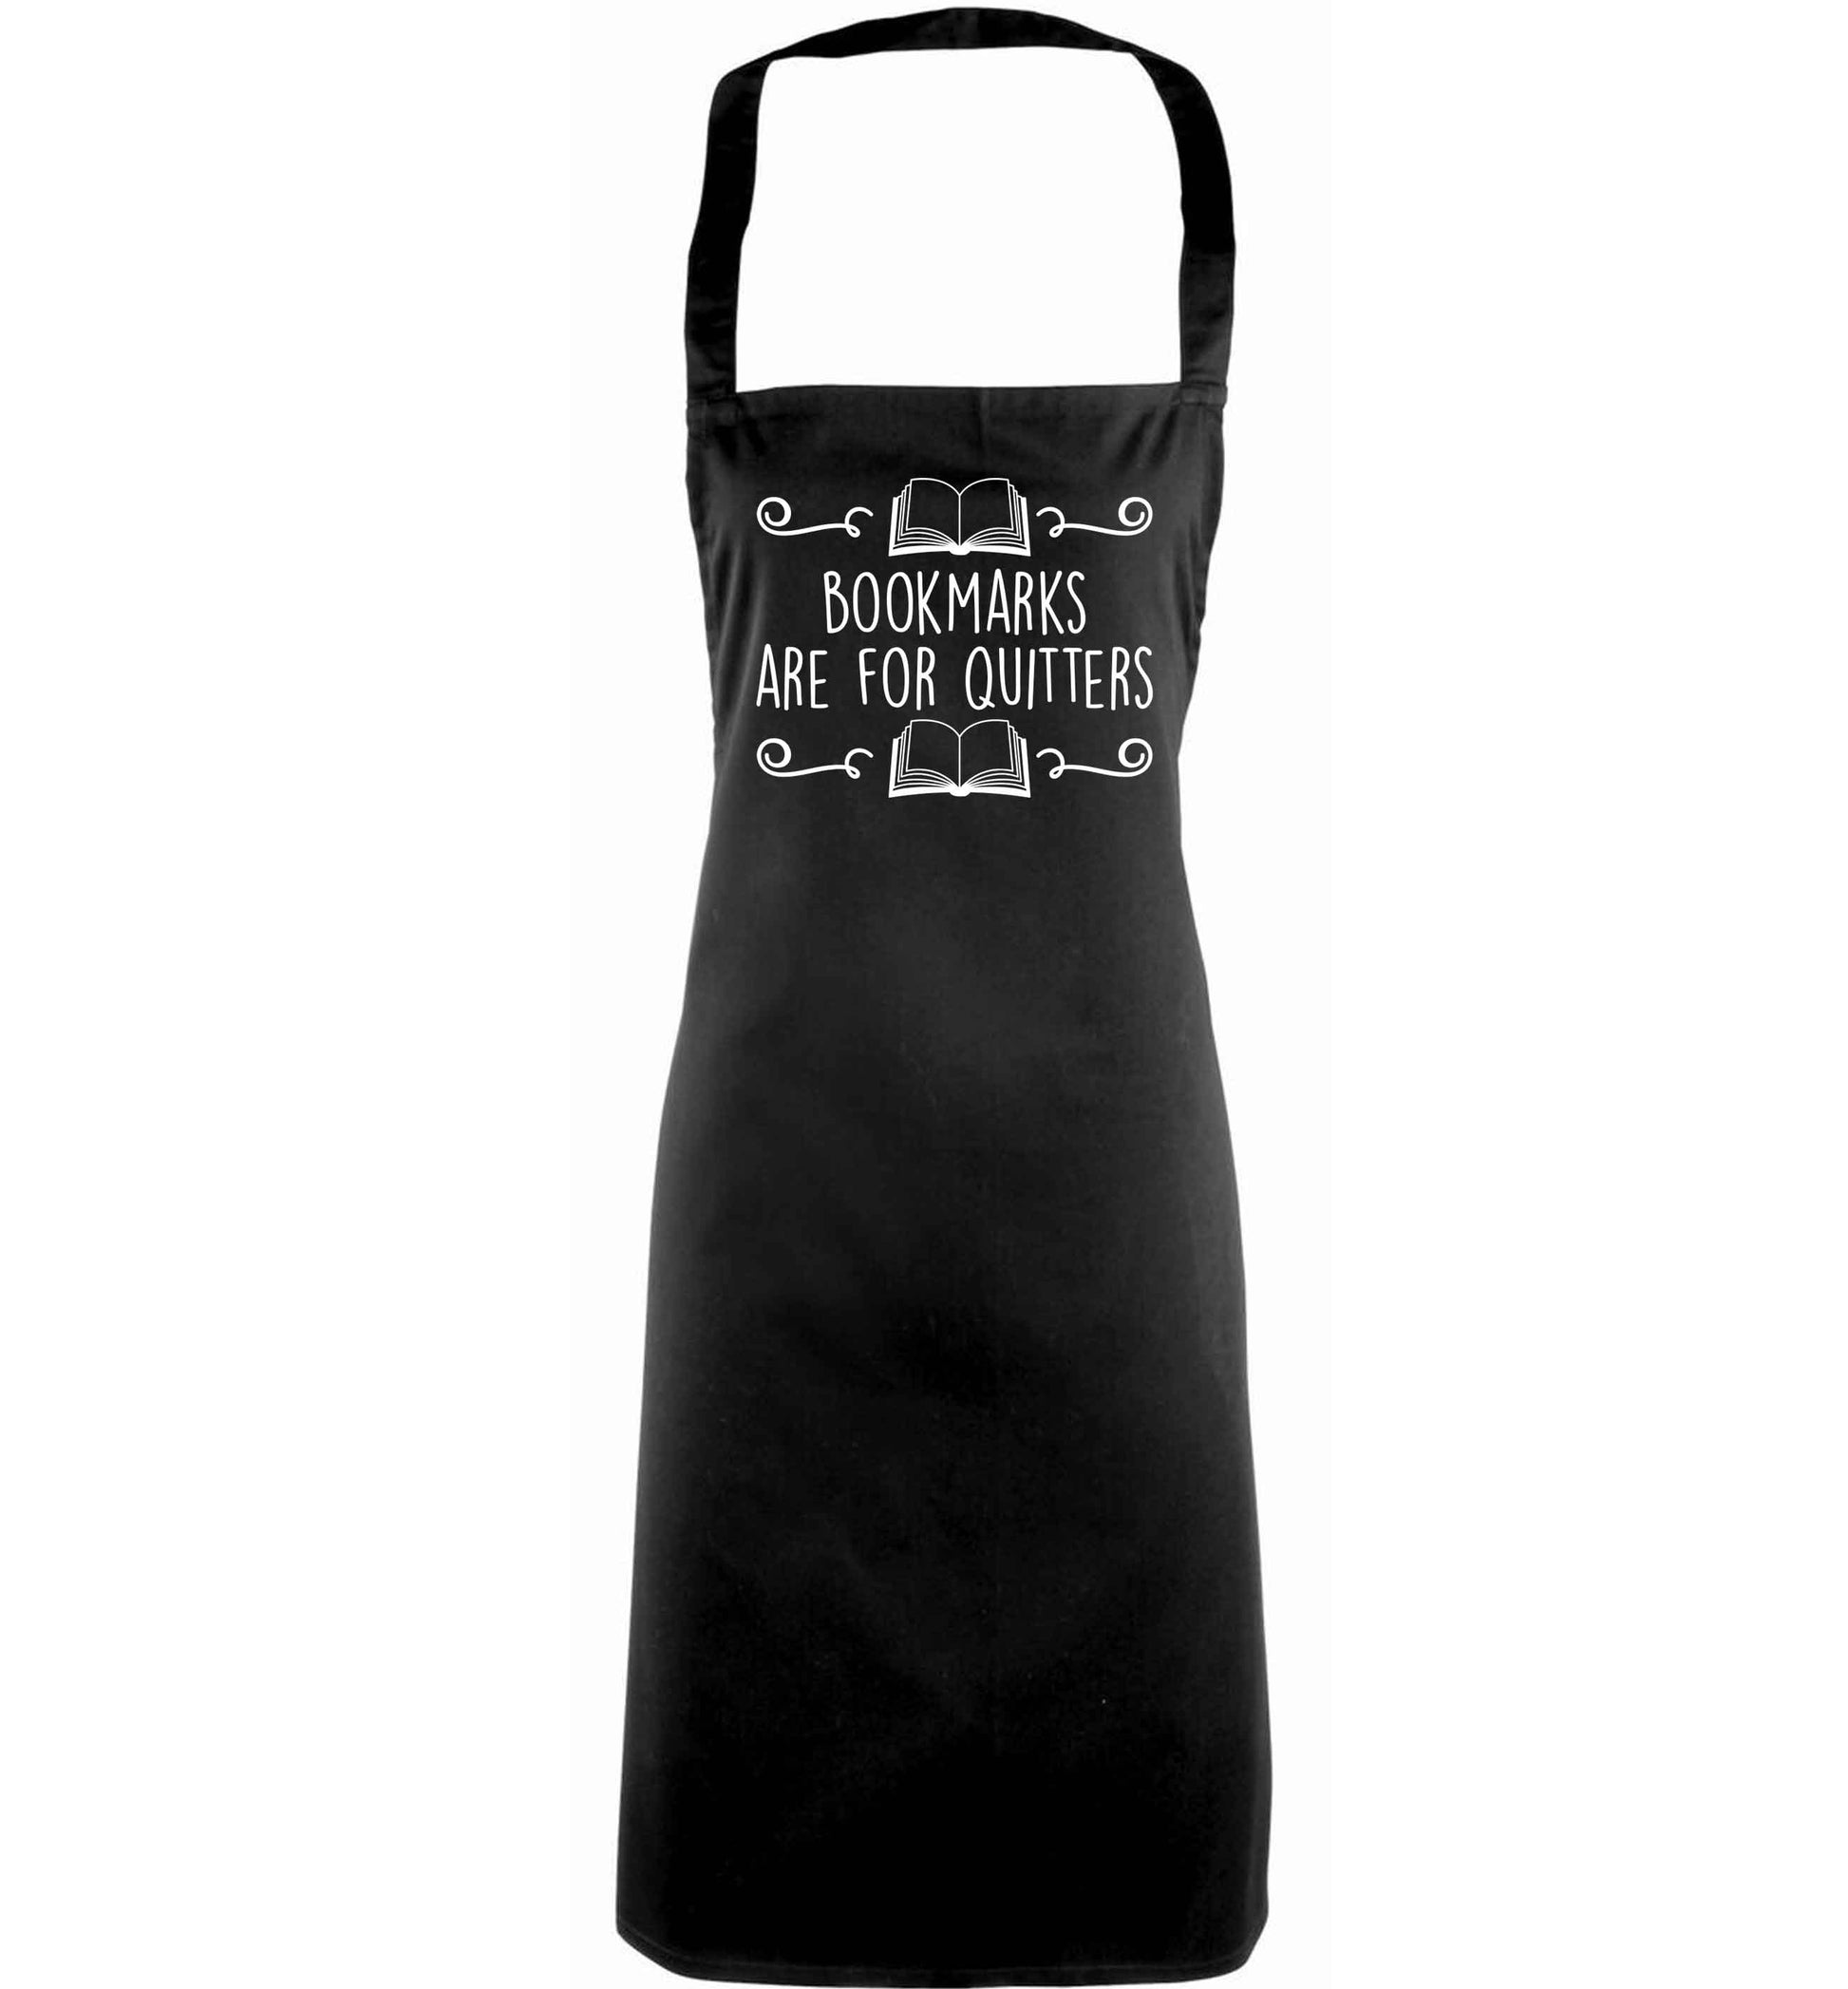 Bookmarks are for quitters adults black apron